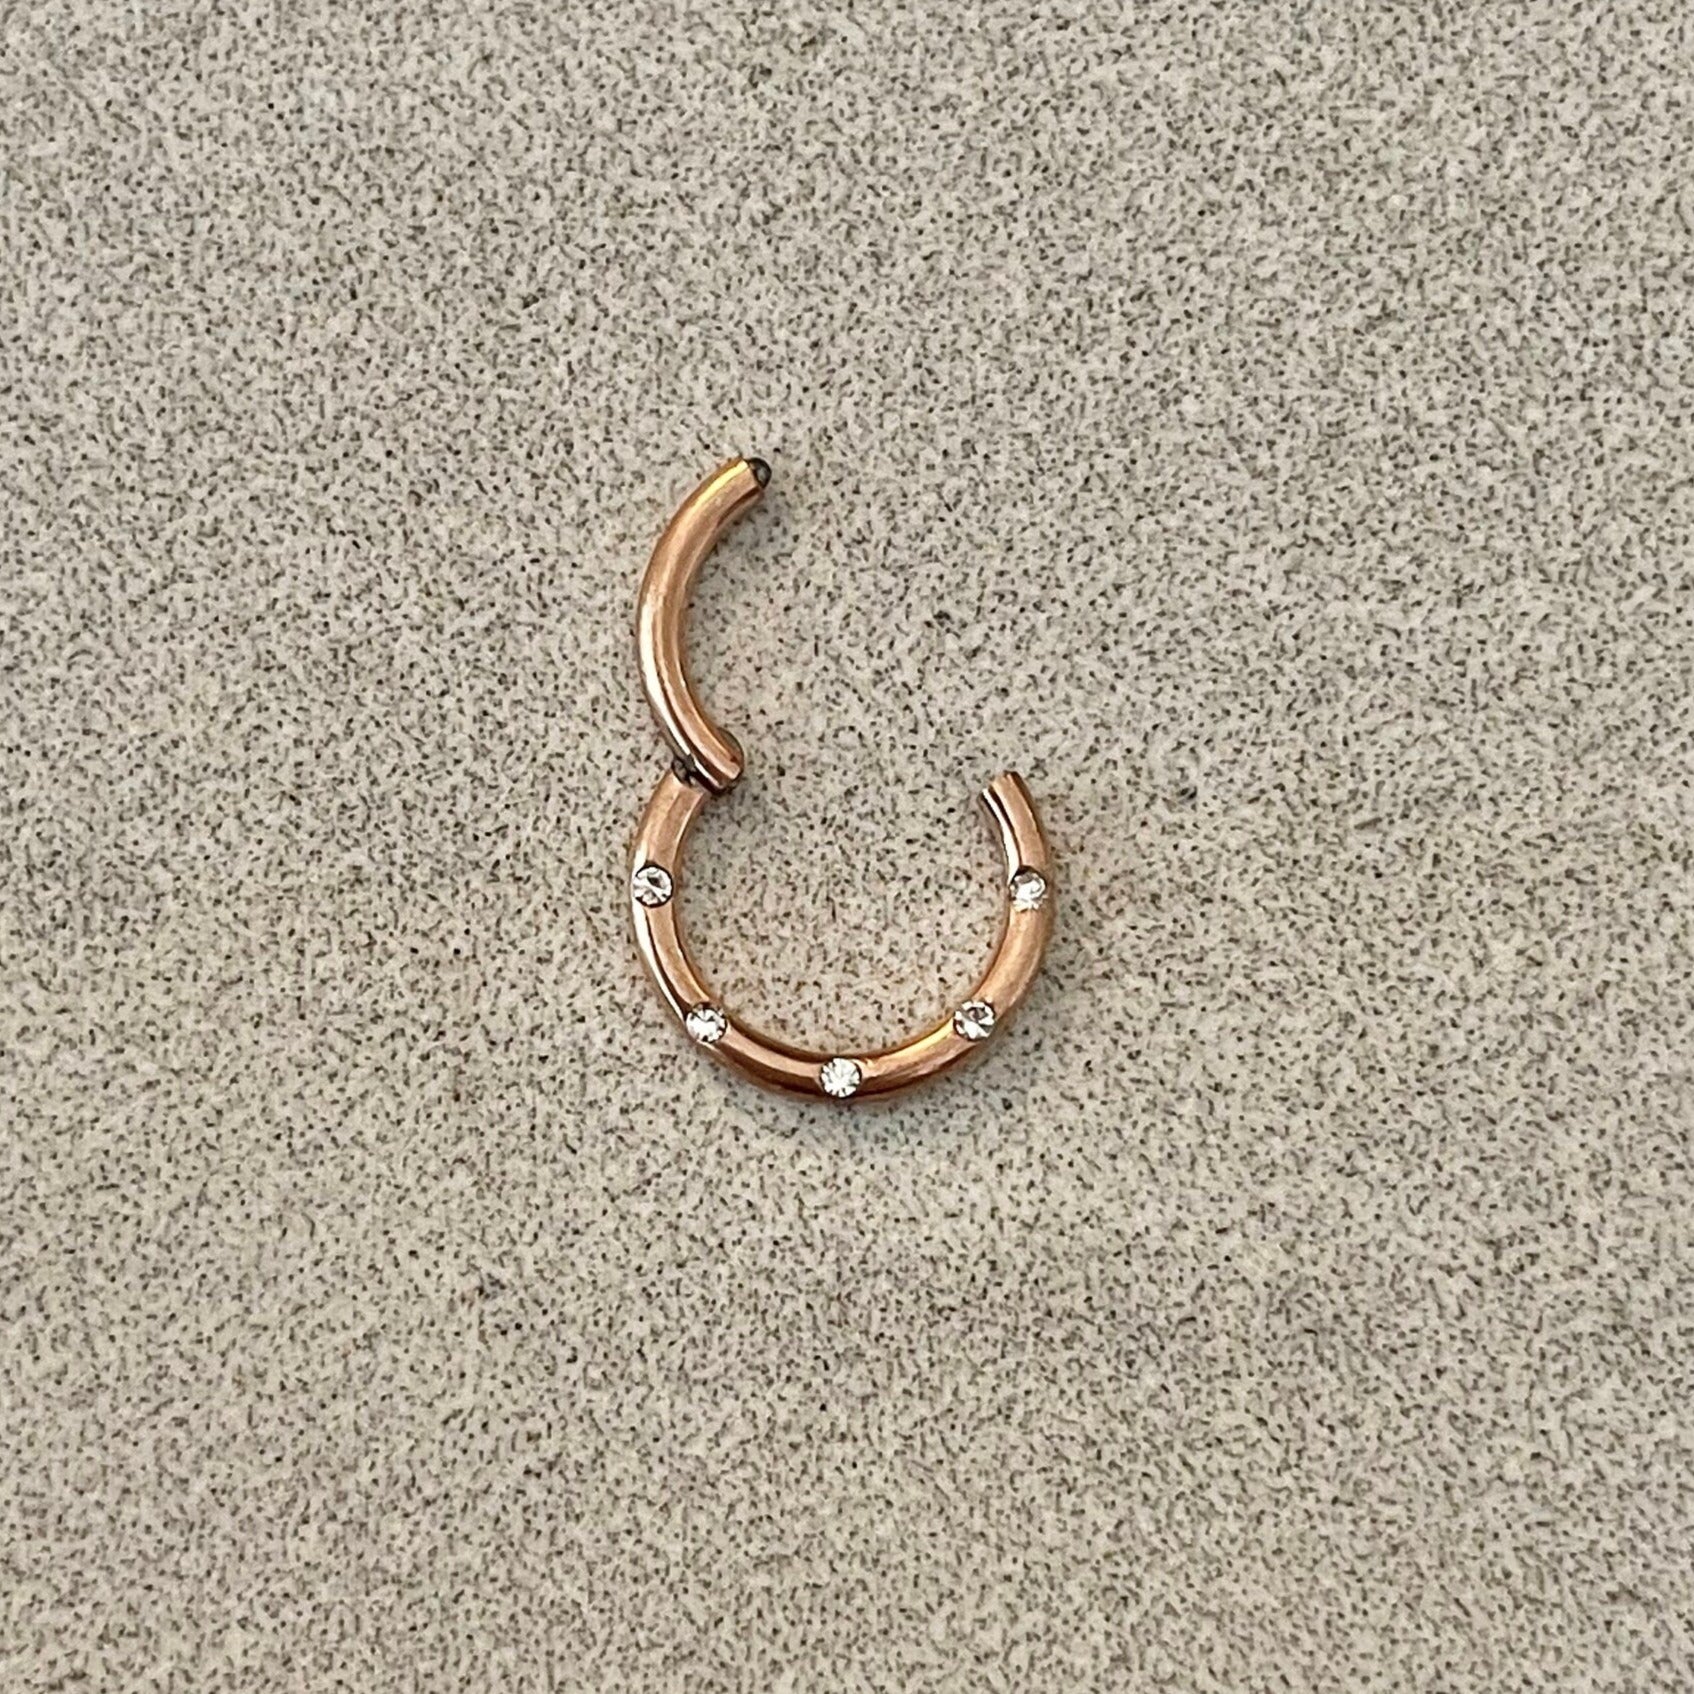 Minimalist Rose Gold Septum Piercing (16G | 8mm or 10mm | Surgical Steel | Rose Gold, Silver, Gold, Black or Rainbow)